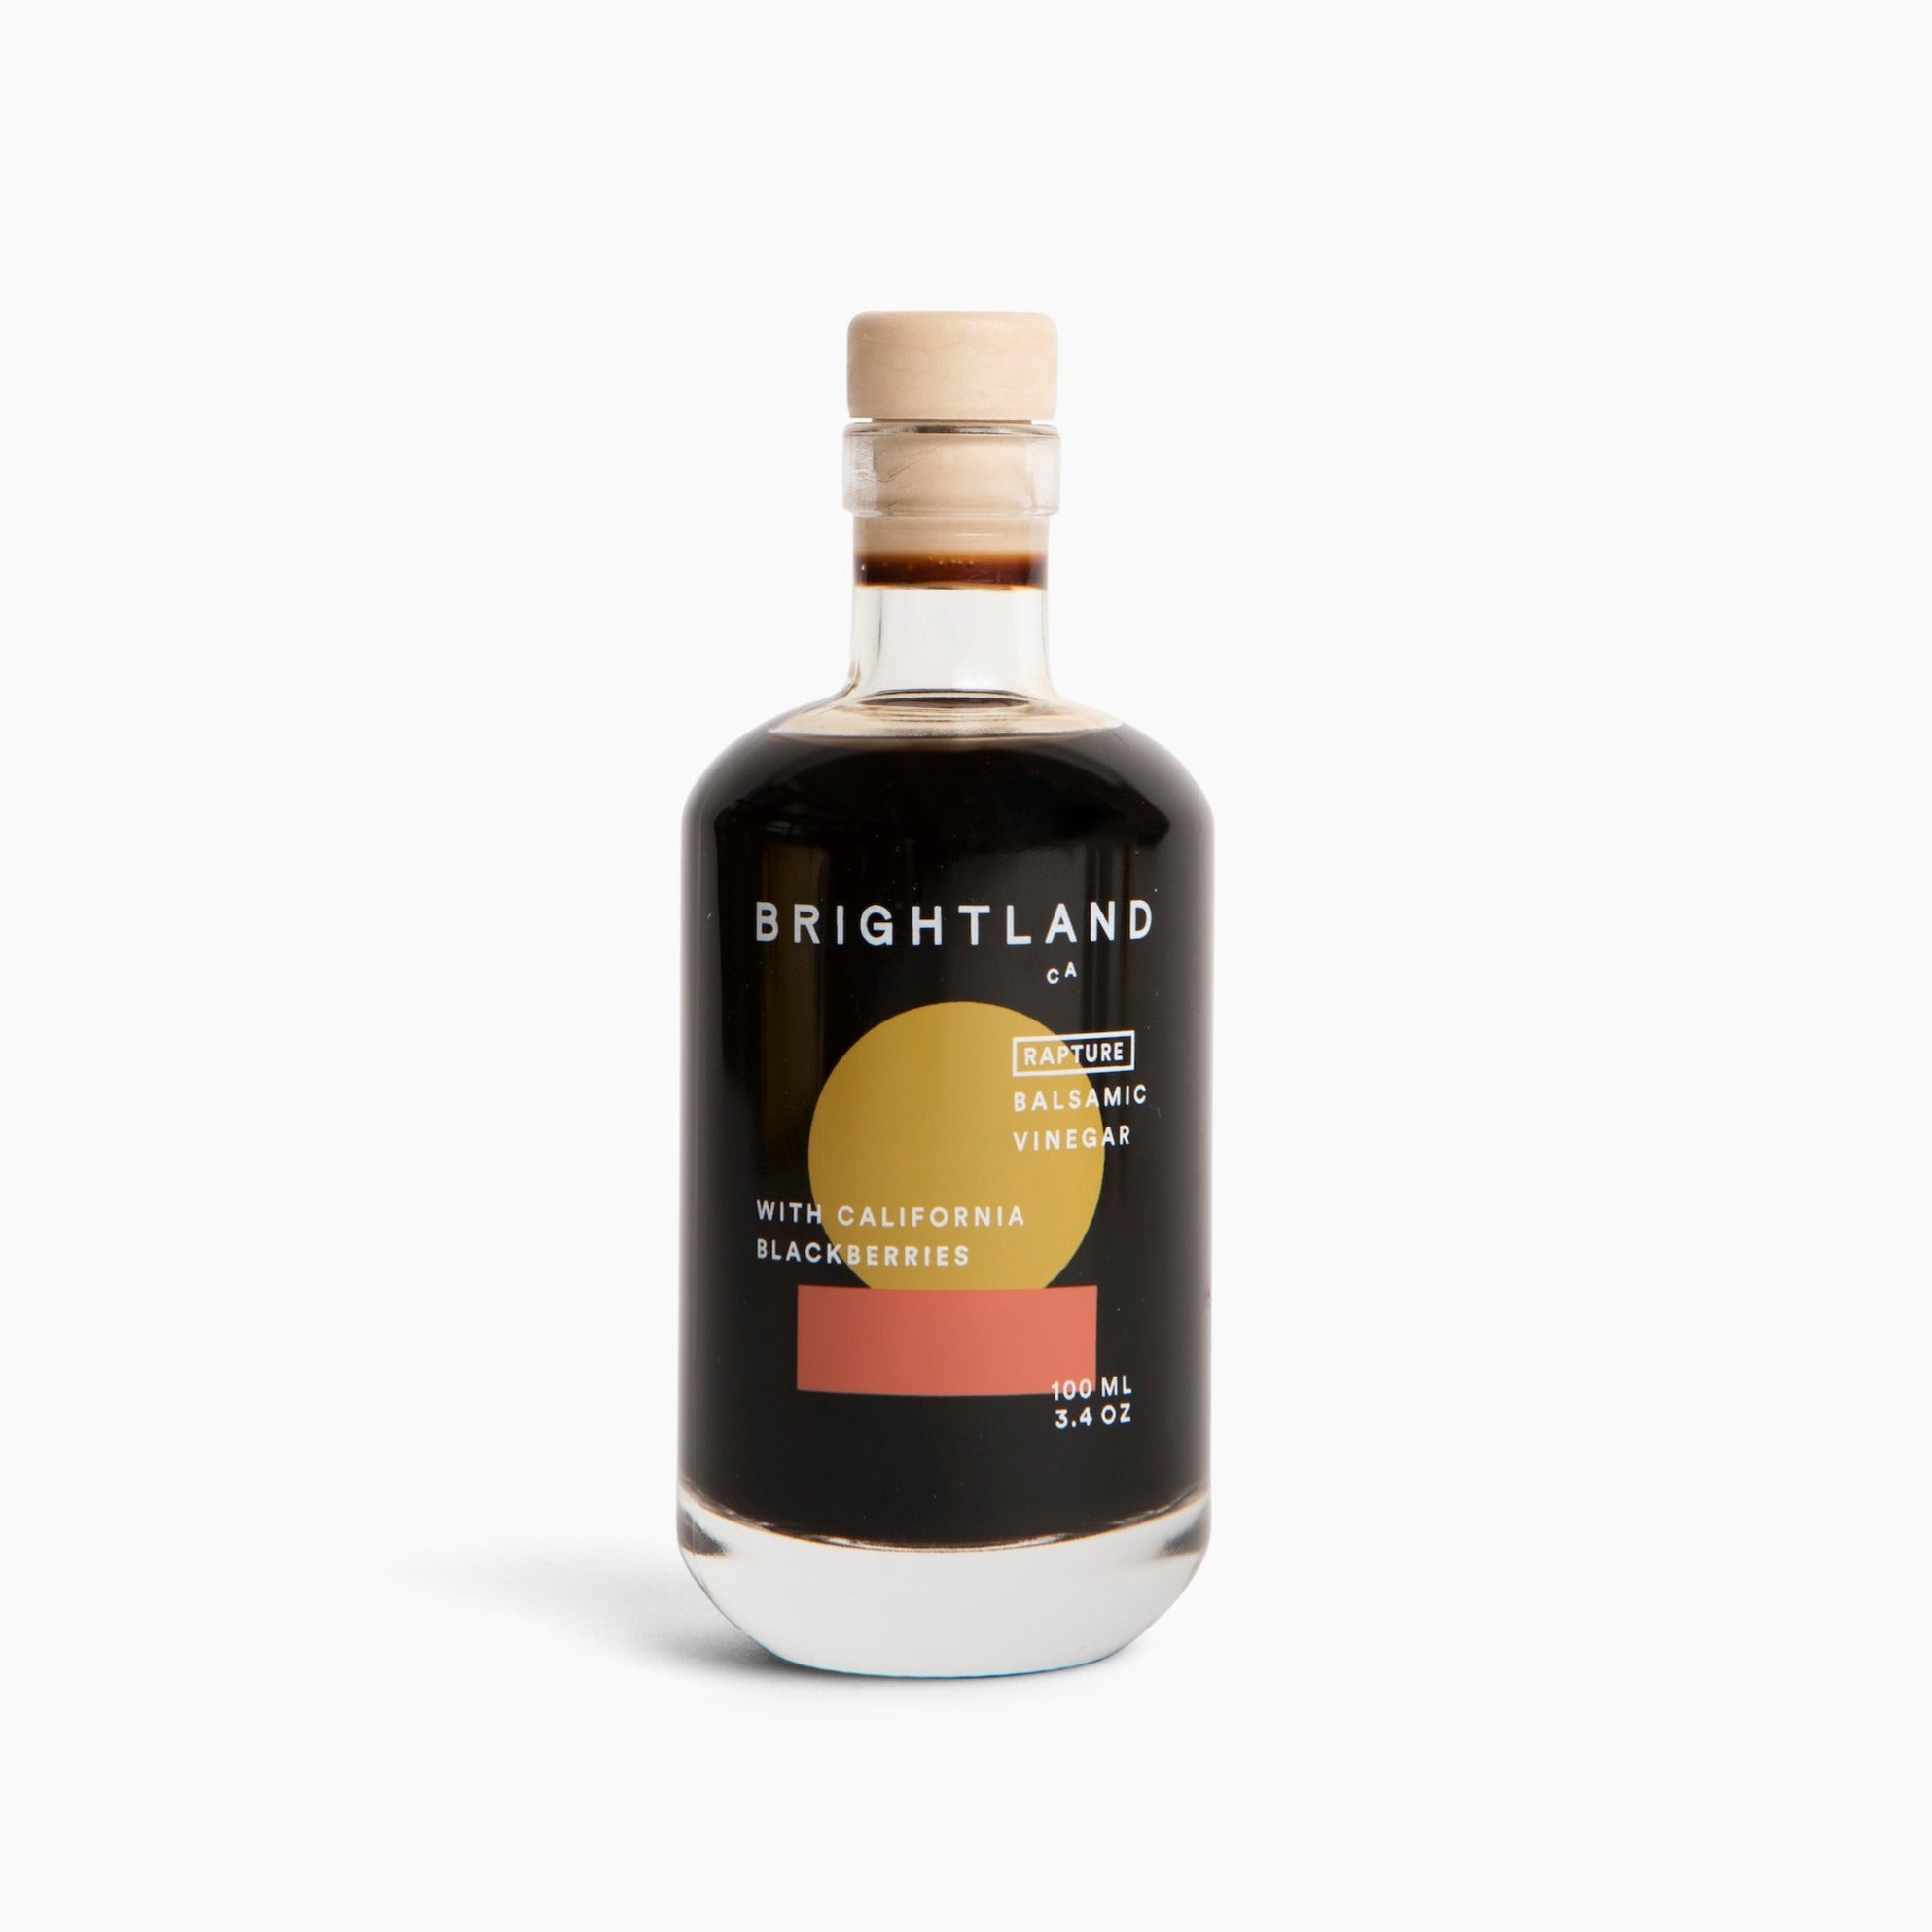 A glass bottle with beige cork topper containing dark brown vinegar. White Text on bottle reads, "Brightland CA Rapture Balsamic Vinegar With California Blackberries 200mL 3.4 oz". Photographed on white background. 